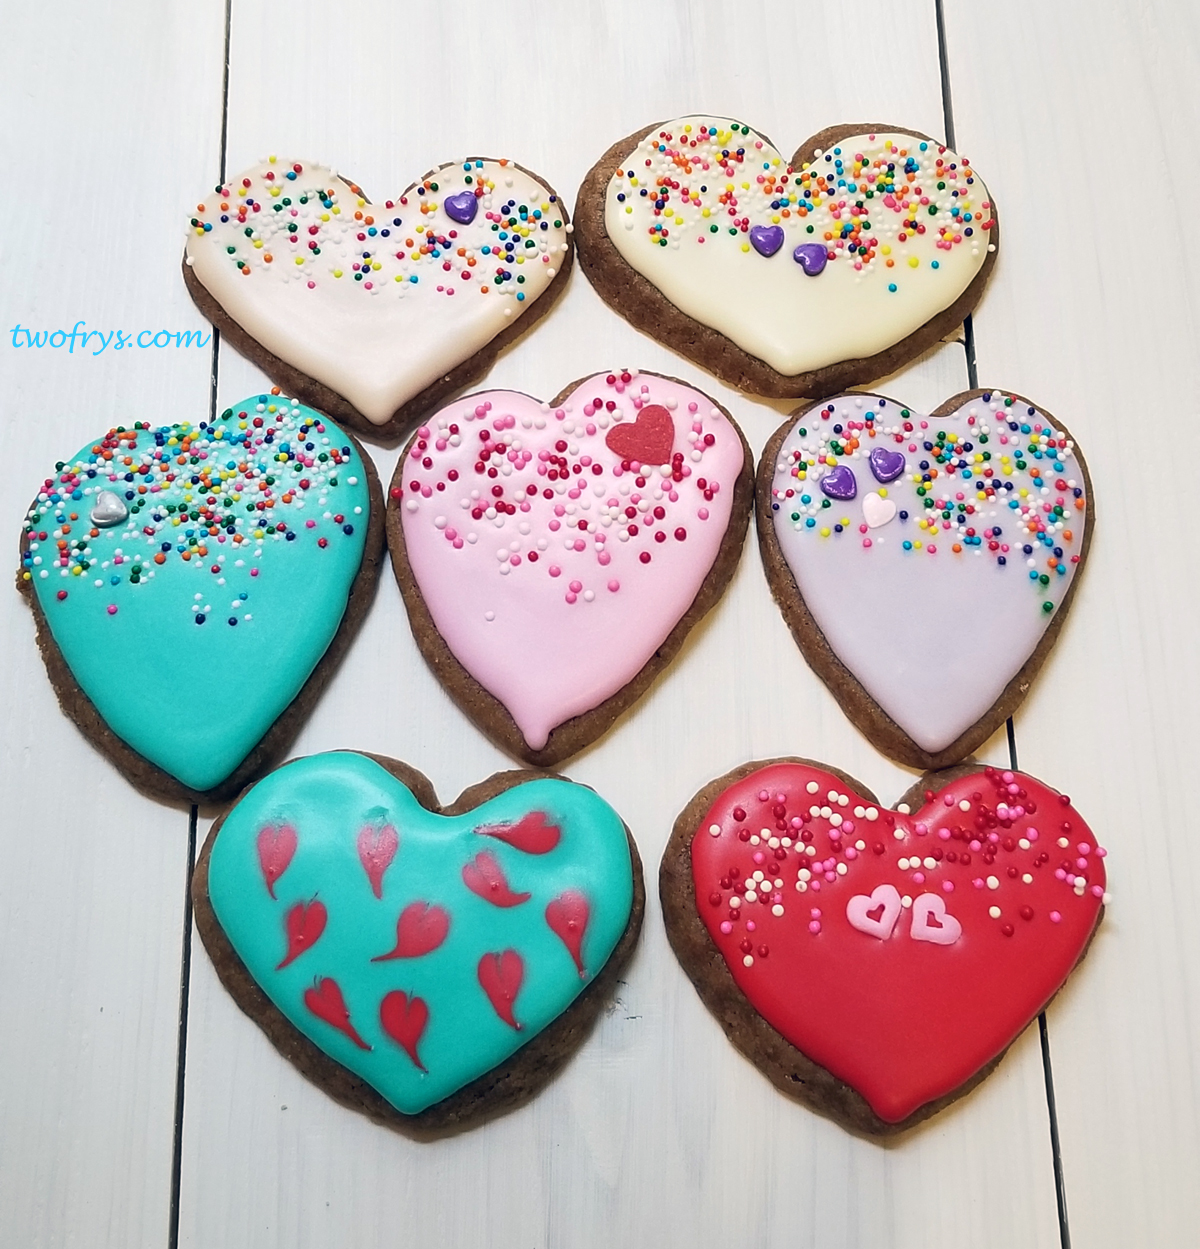 Two Frys: Valentine's Day Cookies